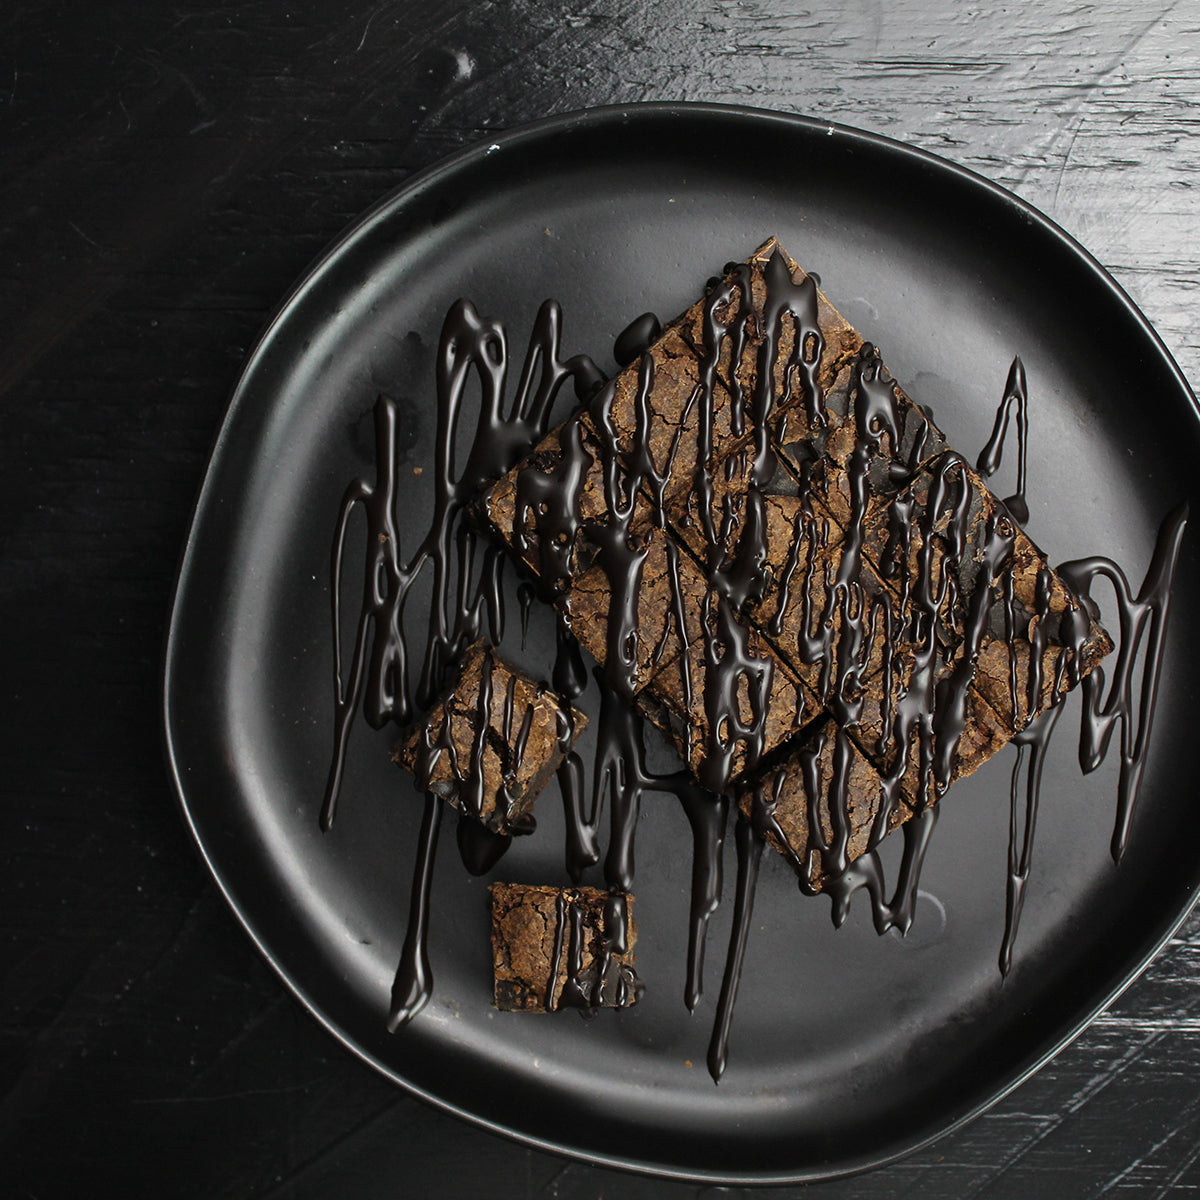 brownie bites drizzled with chocolate sauce on black plate